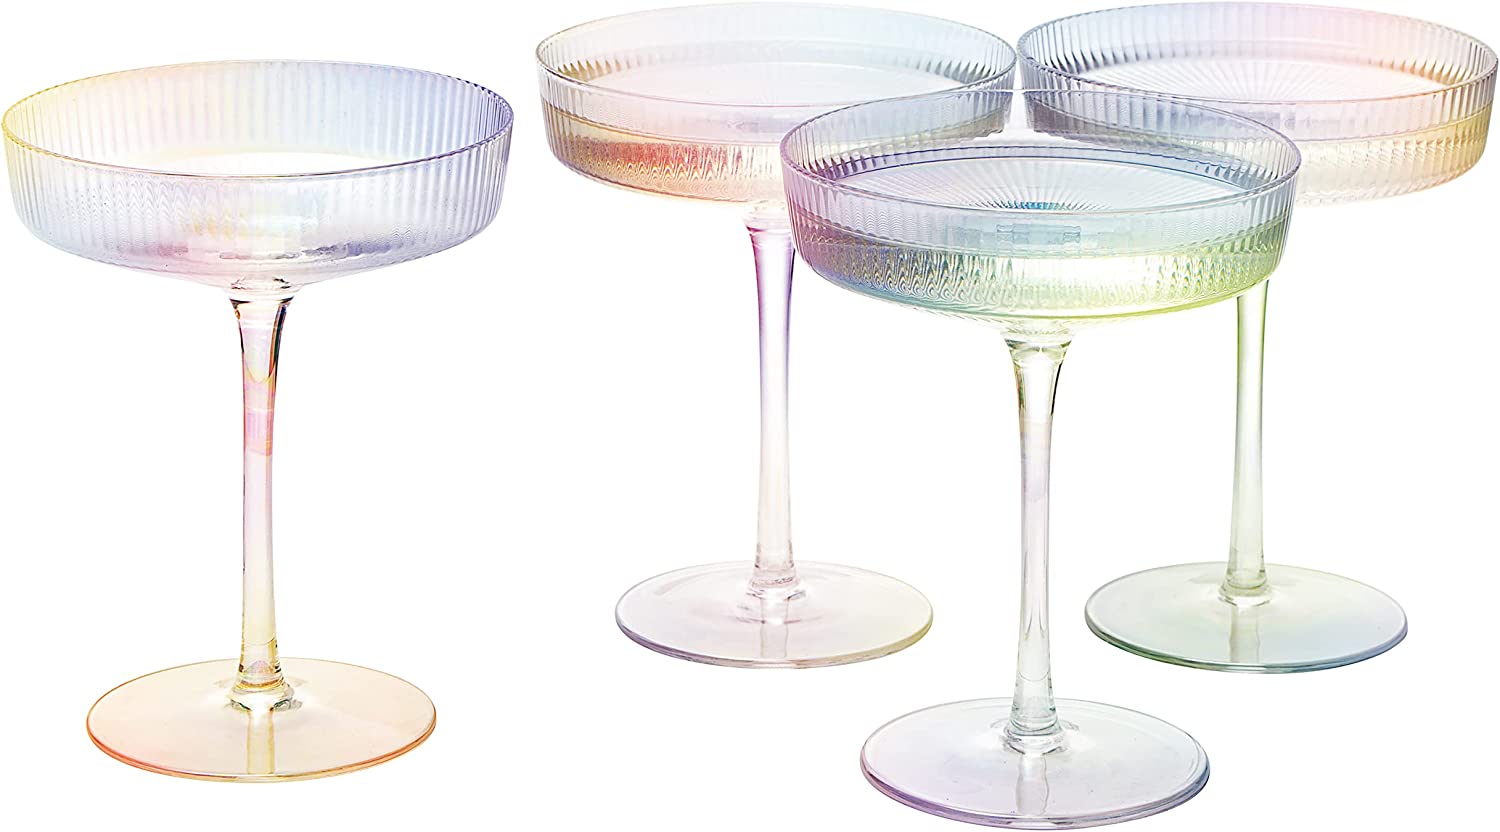 Ribbed Coupe Cocktail Glasses 8 oz | Set of 4 | Classic Manhattan Glasses For Cocktails, Champagne Coupe, Ripple Coupe Glasses, Art Deco Gatsby Vintage, Crystal with Stems (Iridescent)-8